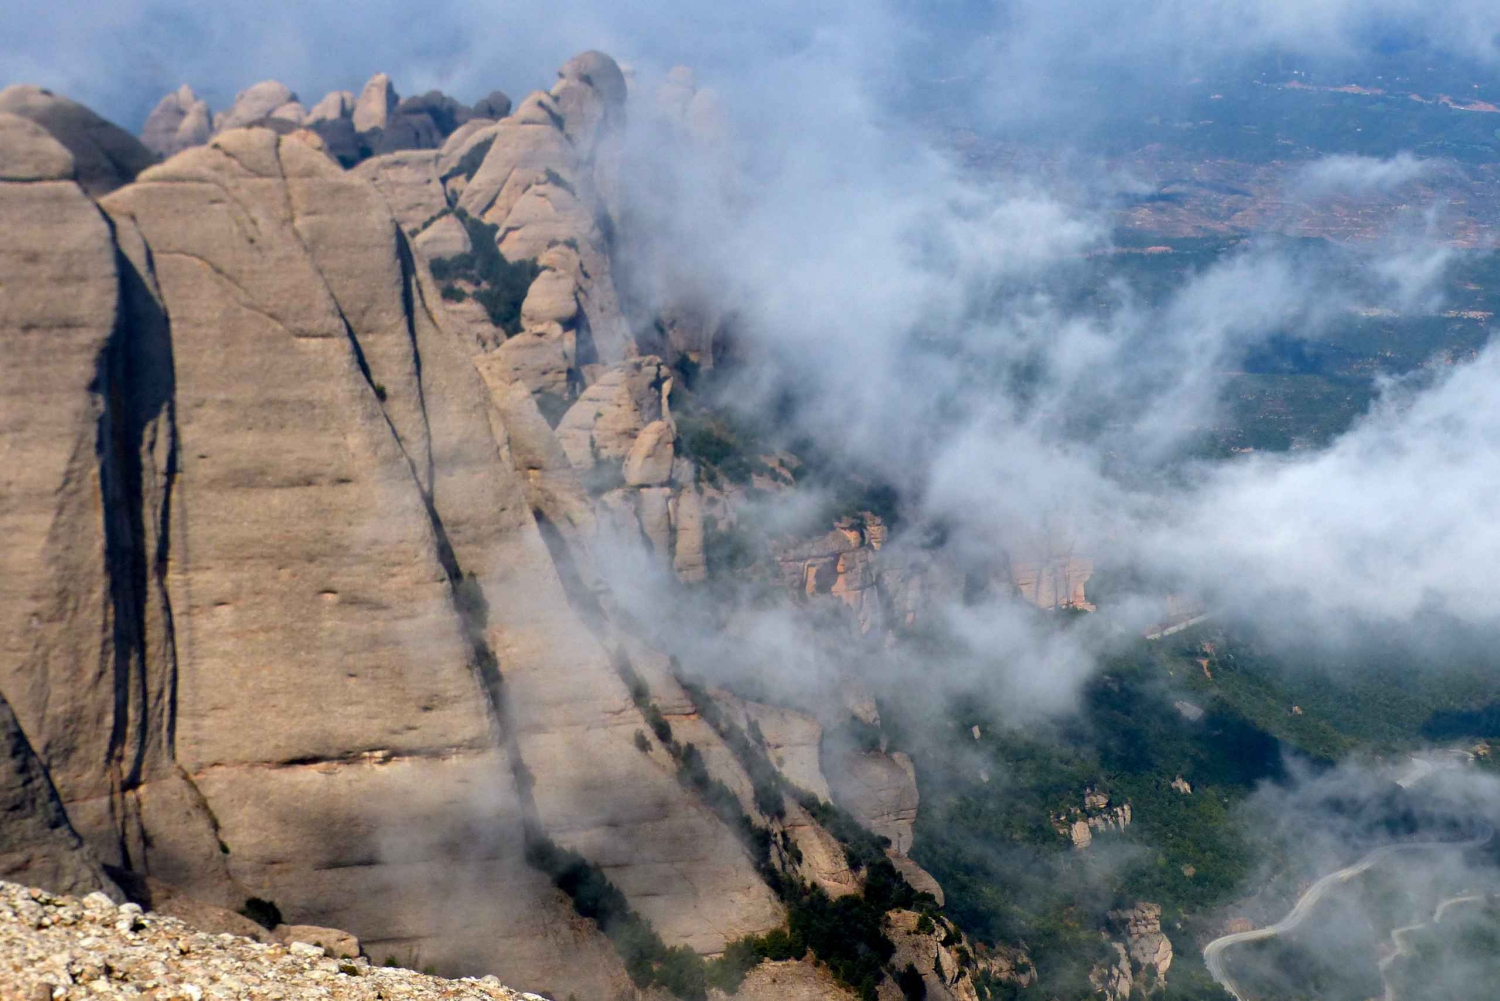 Montserrat Hike, Wine Tasting and Tapas from Barcelona